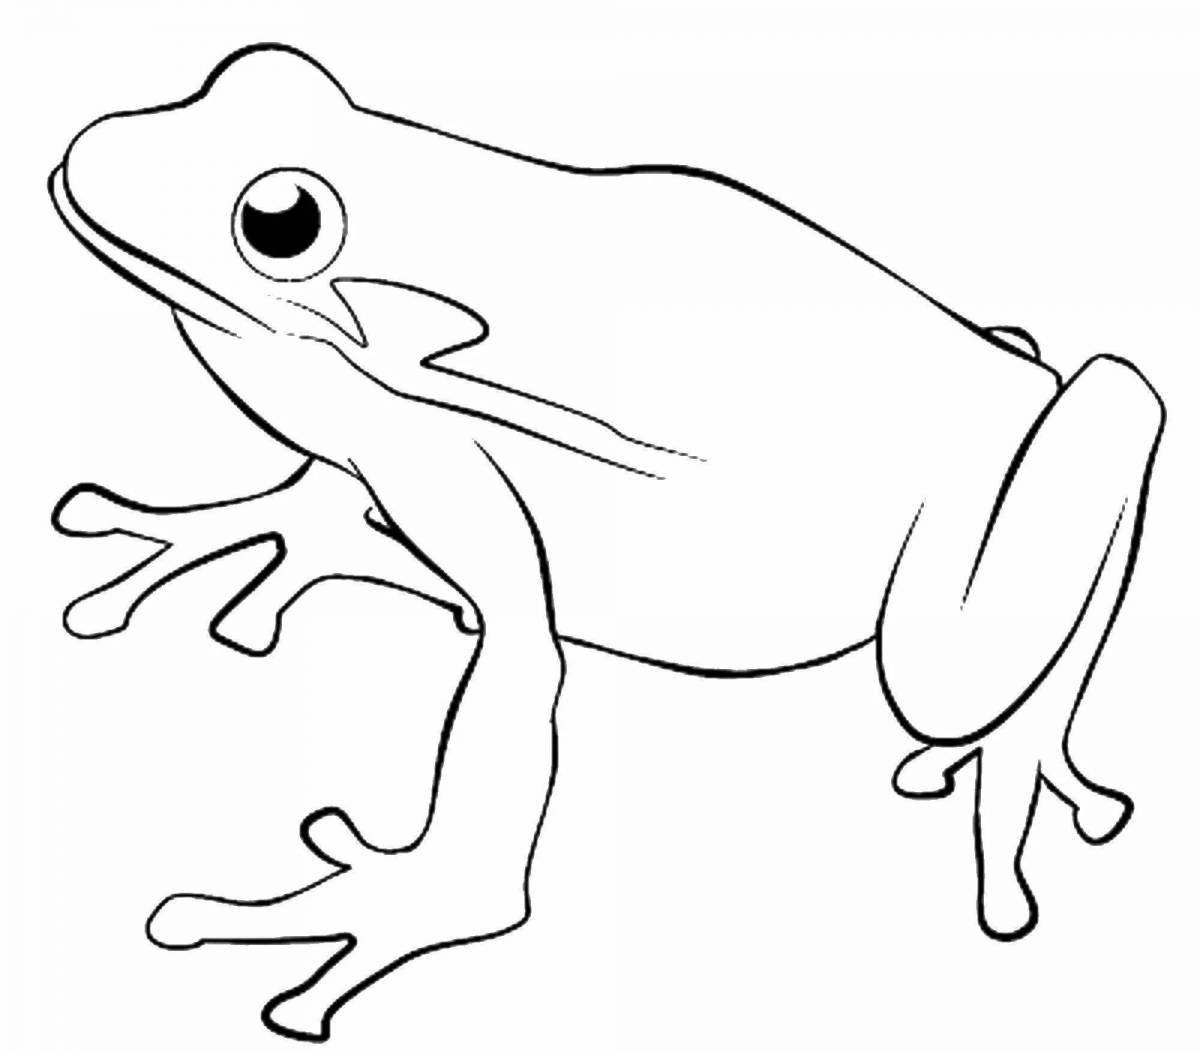 Great toad coloring book for kids